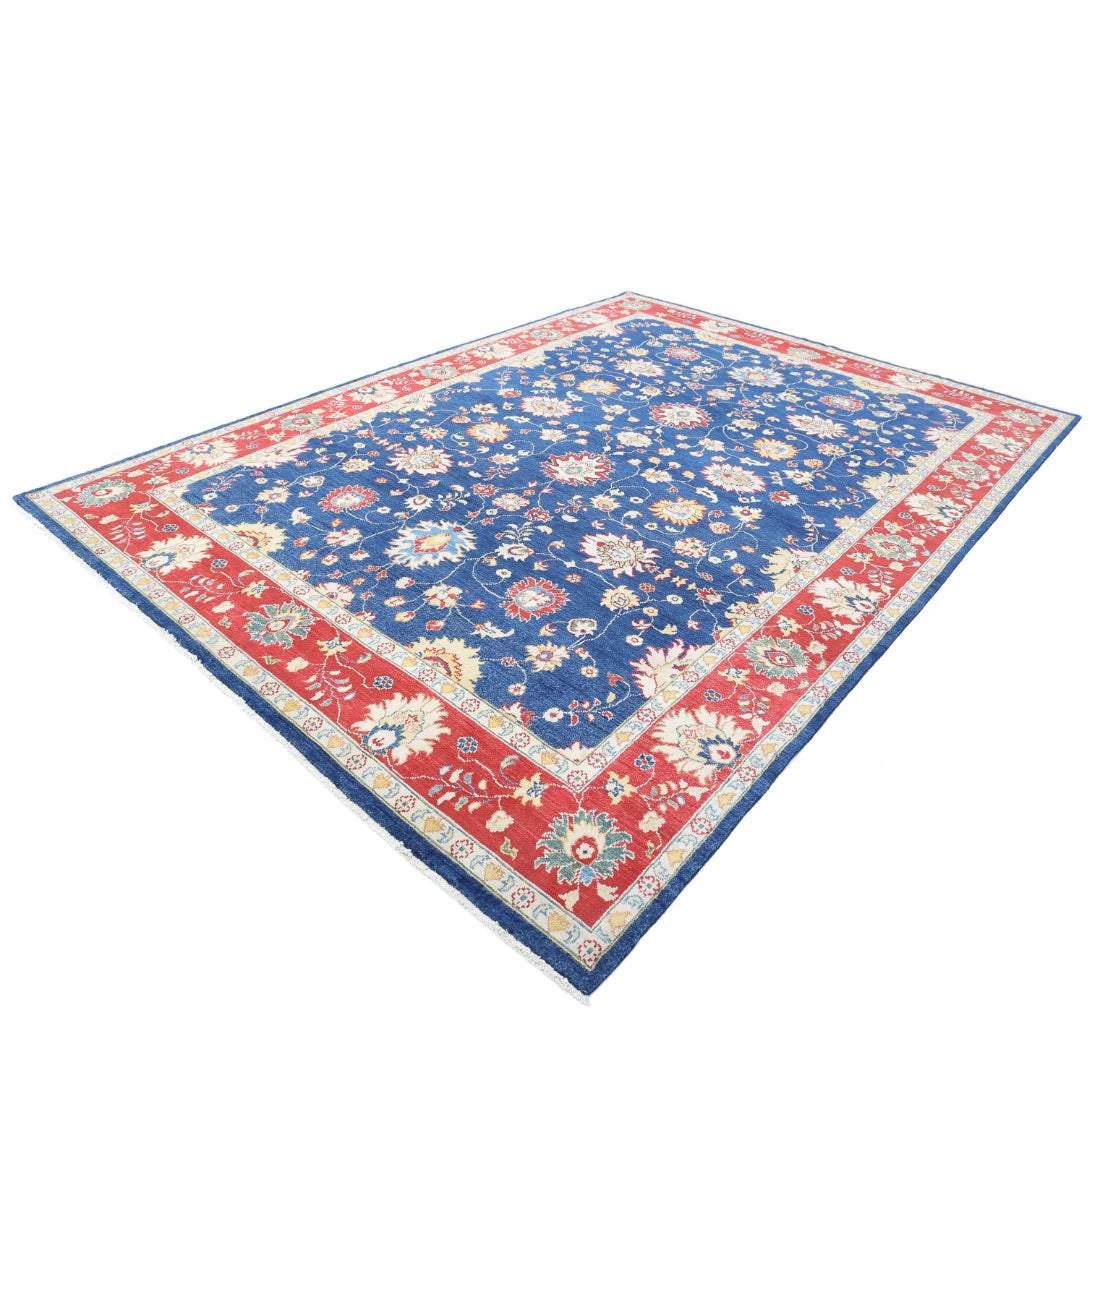 Ziegler 8'10'' X 12'3'' Hand-Knotted Wool Rug 8'10'' x 12'3'' (265 X 368) / Blue / Red